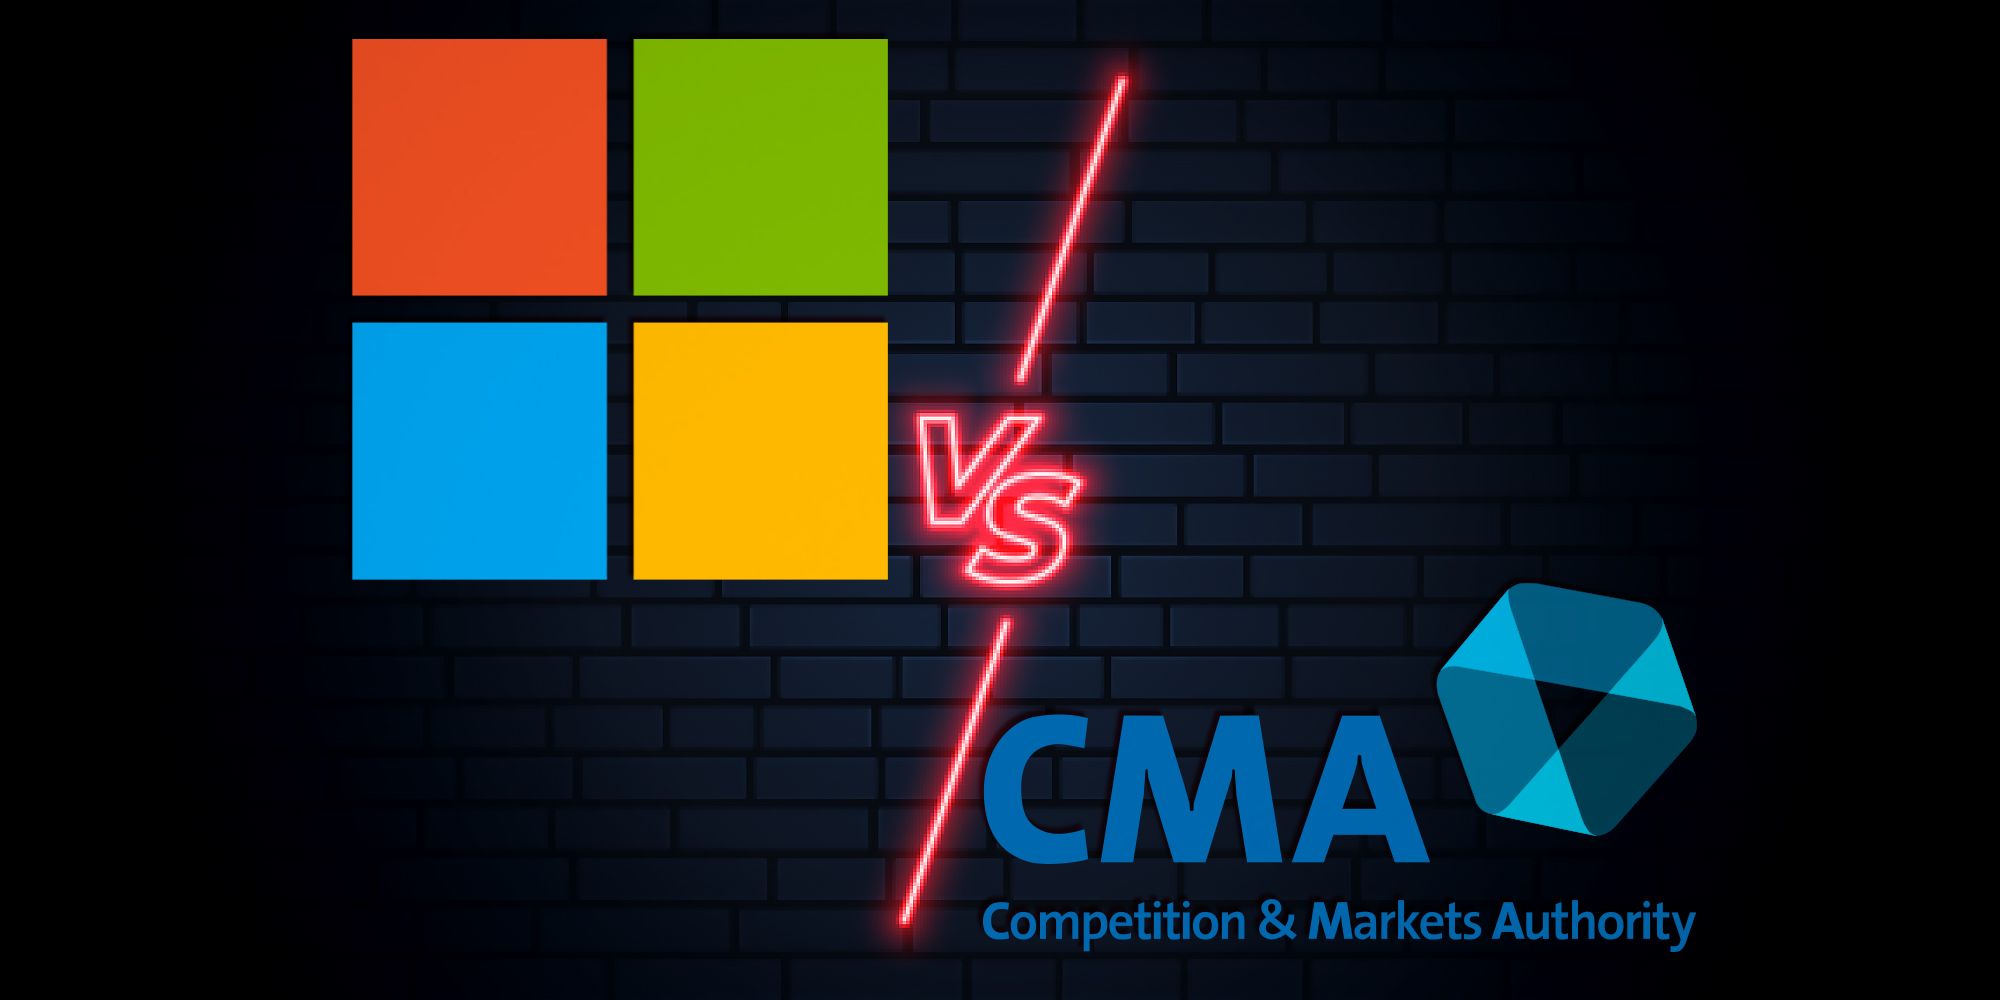 Microsoft vs Competition and Markets Authority versus screen